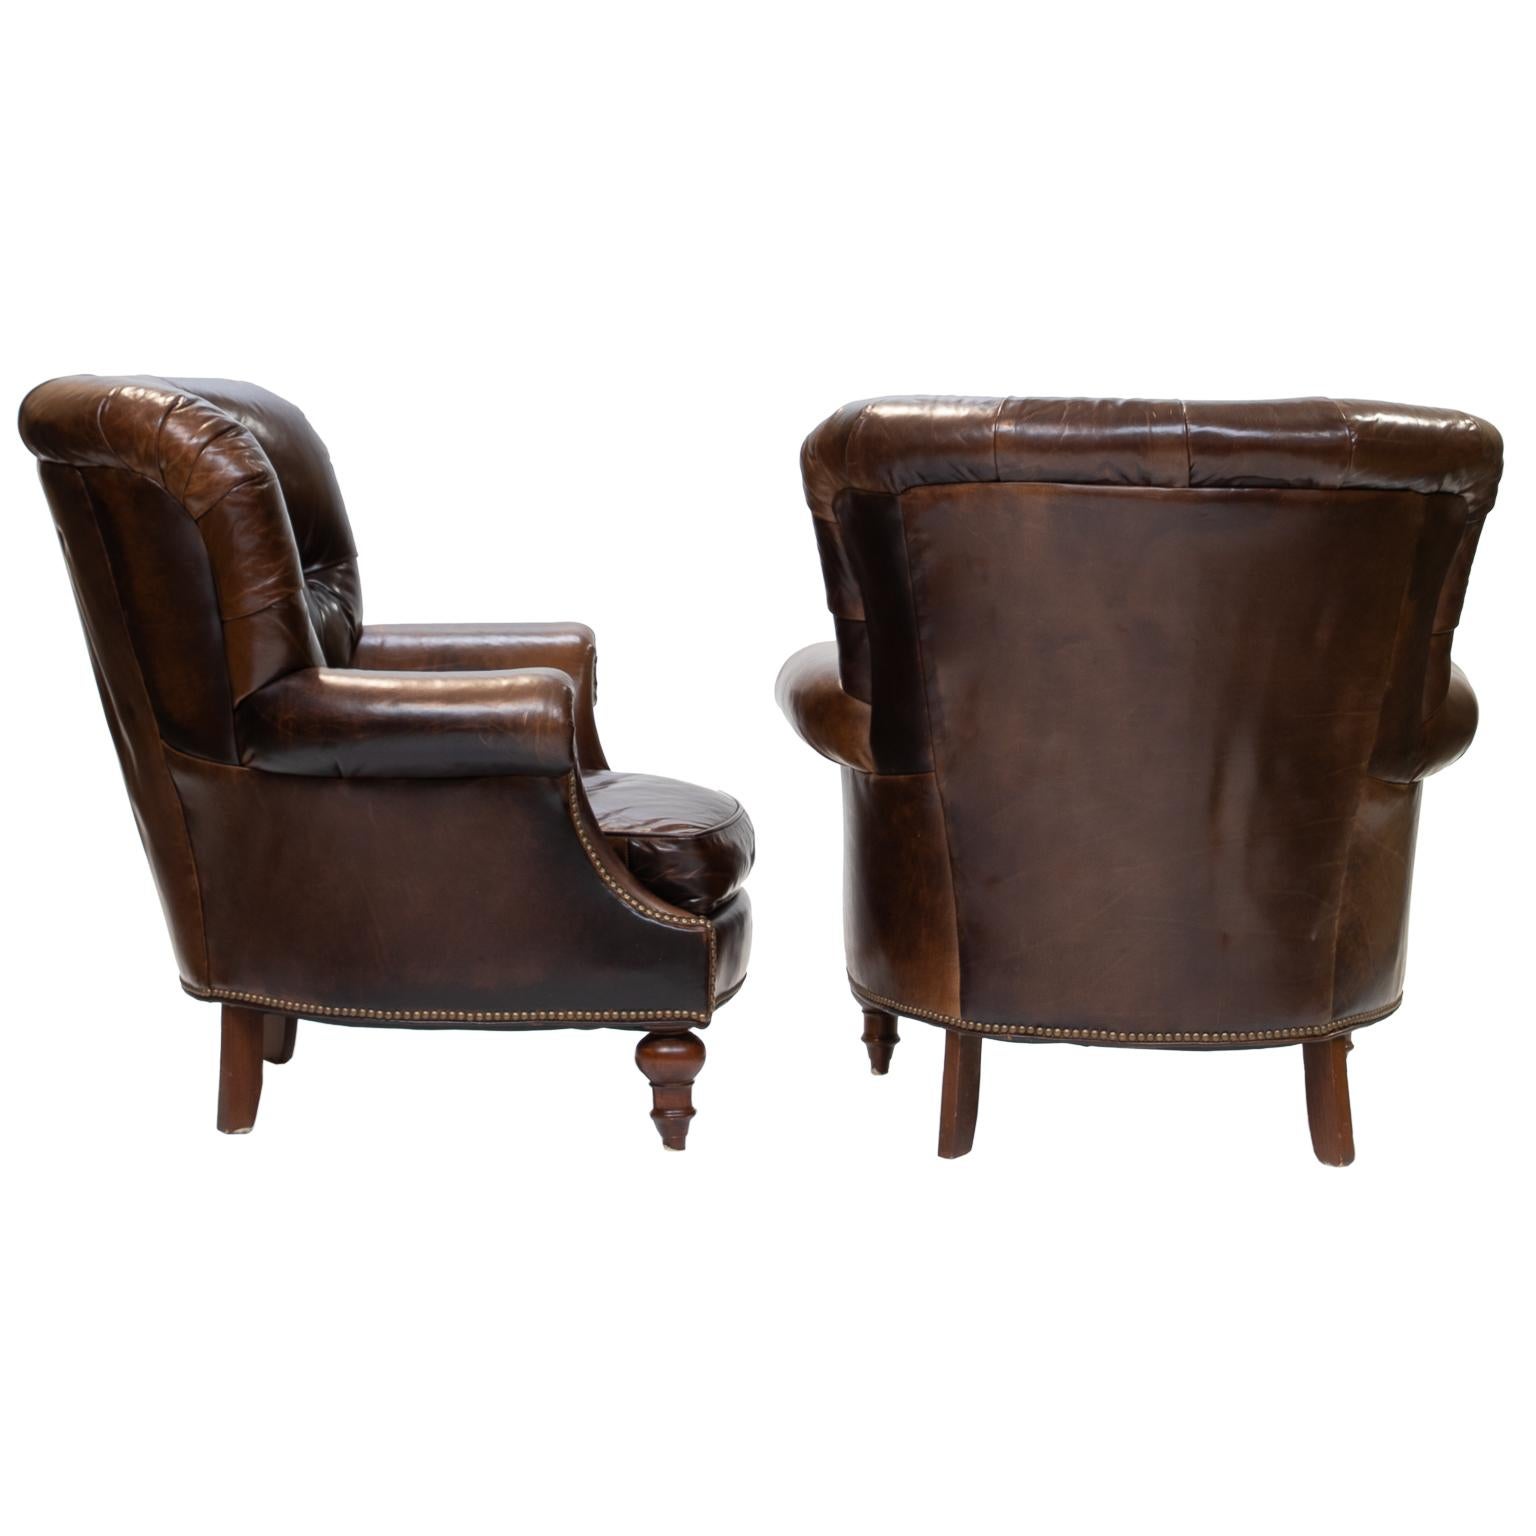 American Pair of Tufted Back Leather Club Chairs